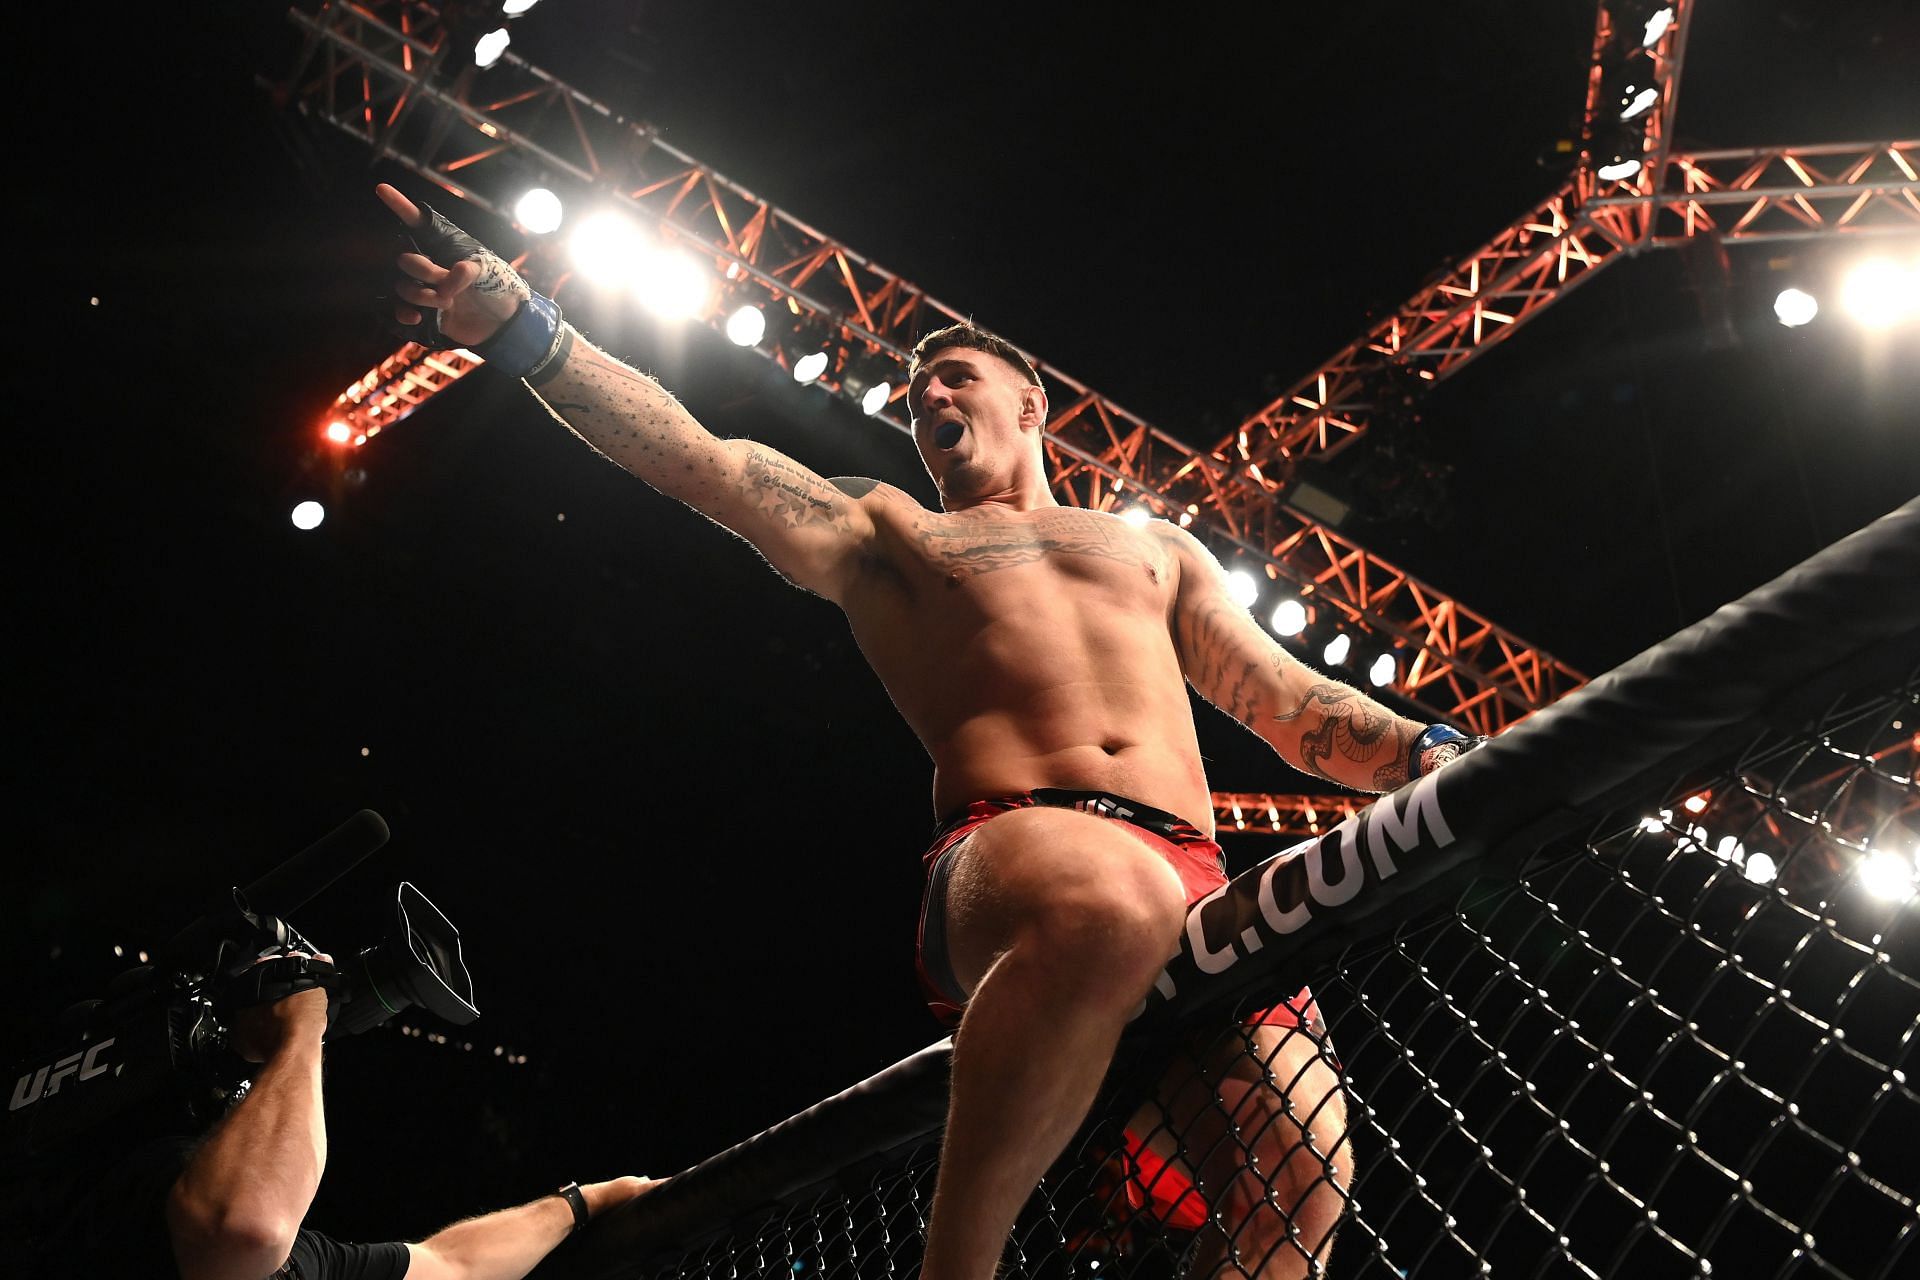 Tom Aspinall dispatched Alexander Volkov with ease in London Paul Taylor became the first UK fighter to win at home in the UFC in five years when he beat Edilberto Crocota